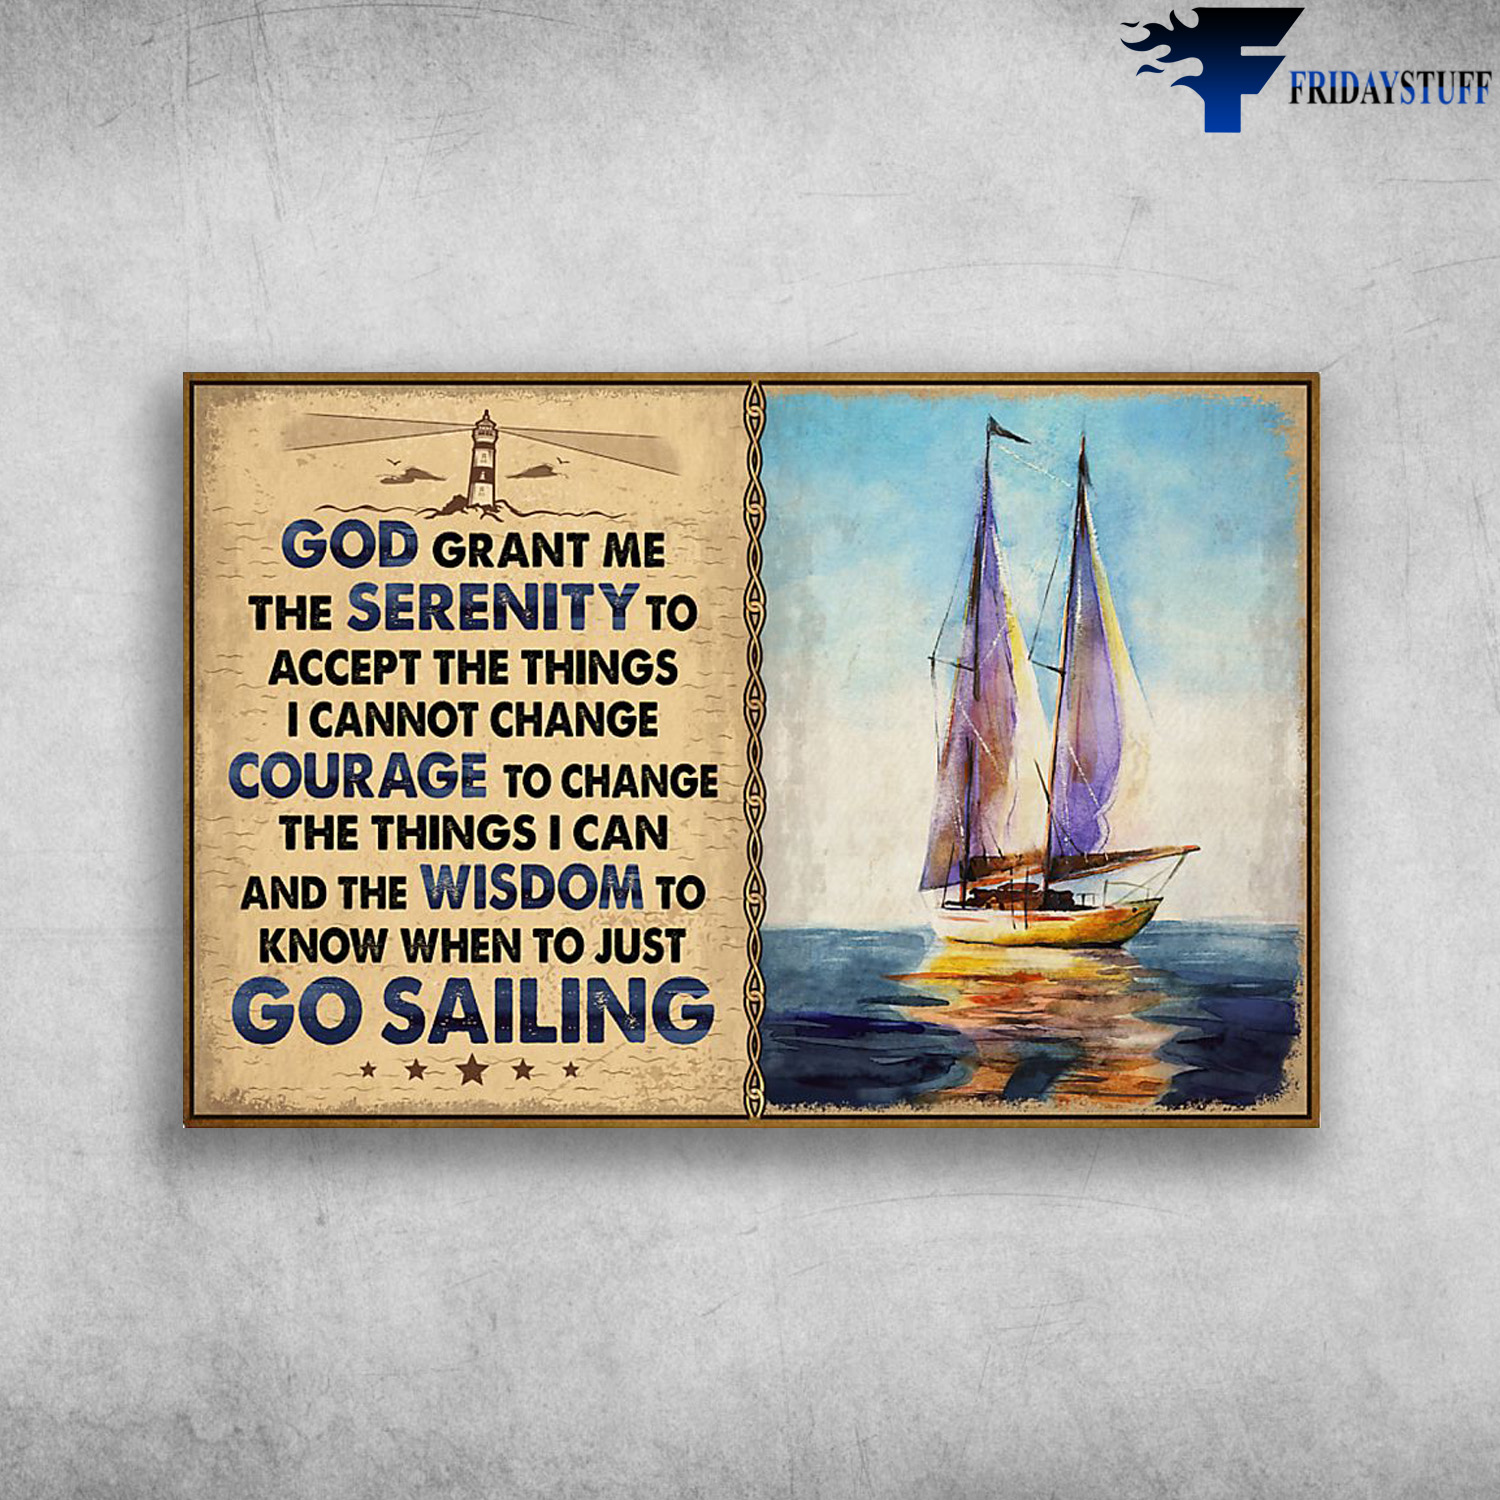 Sailing On The Ocean - God Grant Me The Serenity To Accept The Things, I Cannot Change Courage To Change, The Things I Can And The Wisdom, To Know When To Just Go Sailing